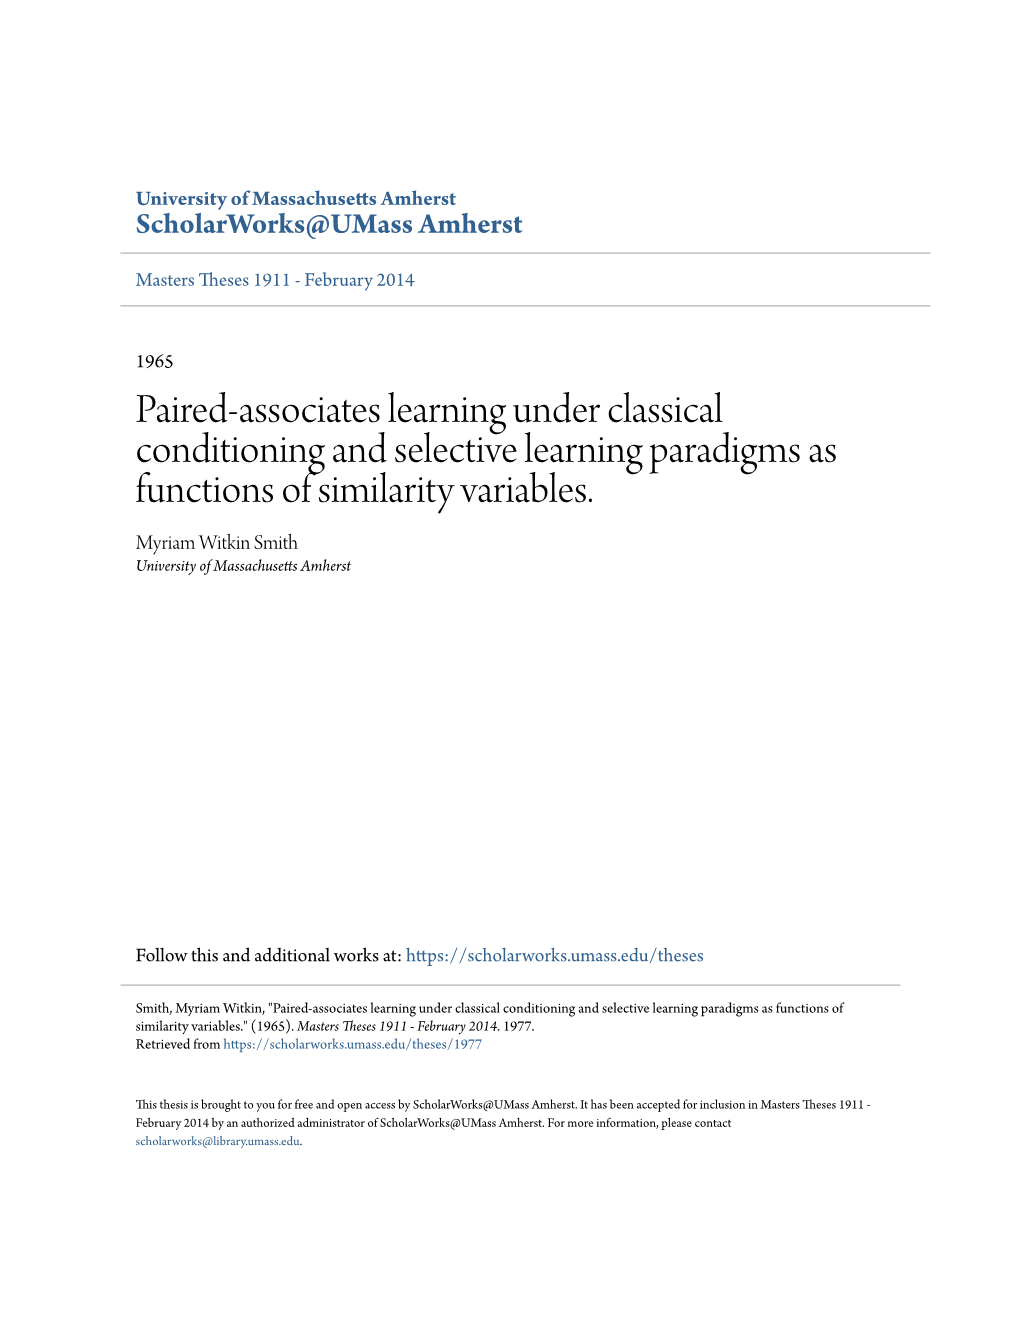 Paired-Associates Learning Under Classical Conditioning and Selective Learning Paradigms As Functions of Similarity Variables